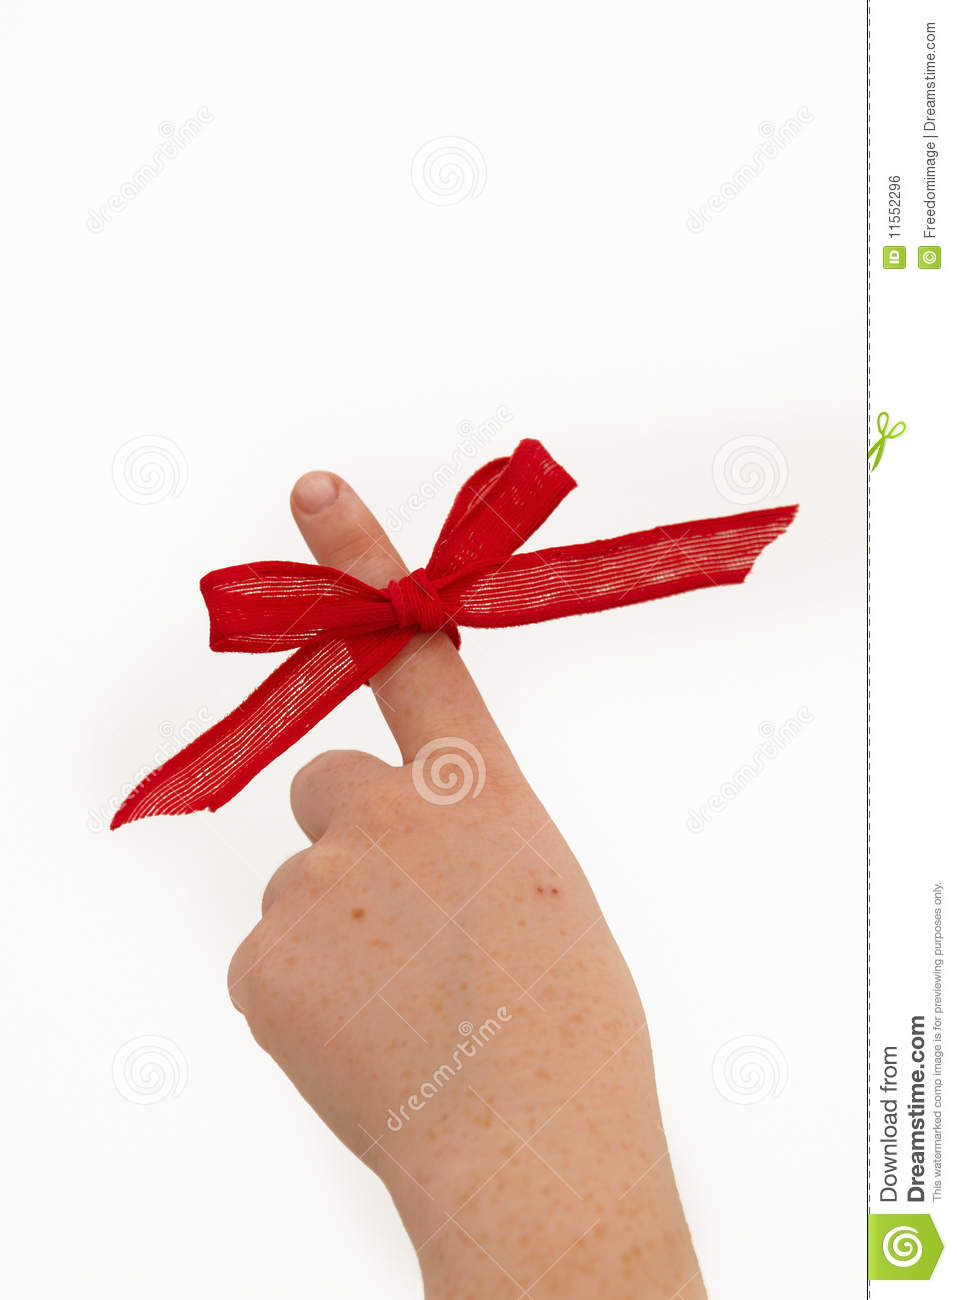 More Similar Stock Images Of   Pointing A Ribbon On A Finger